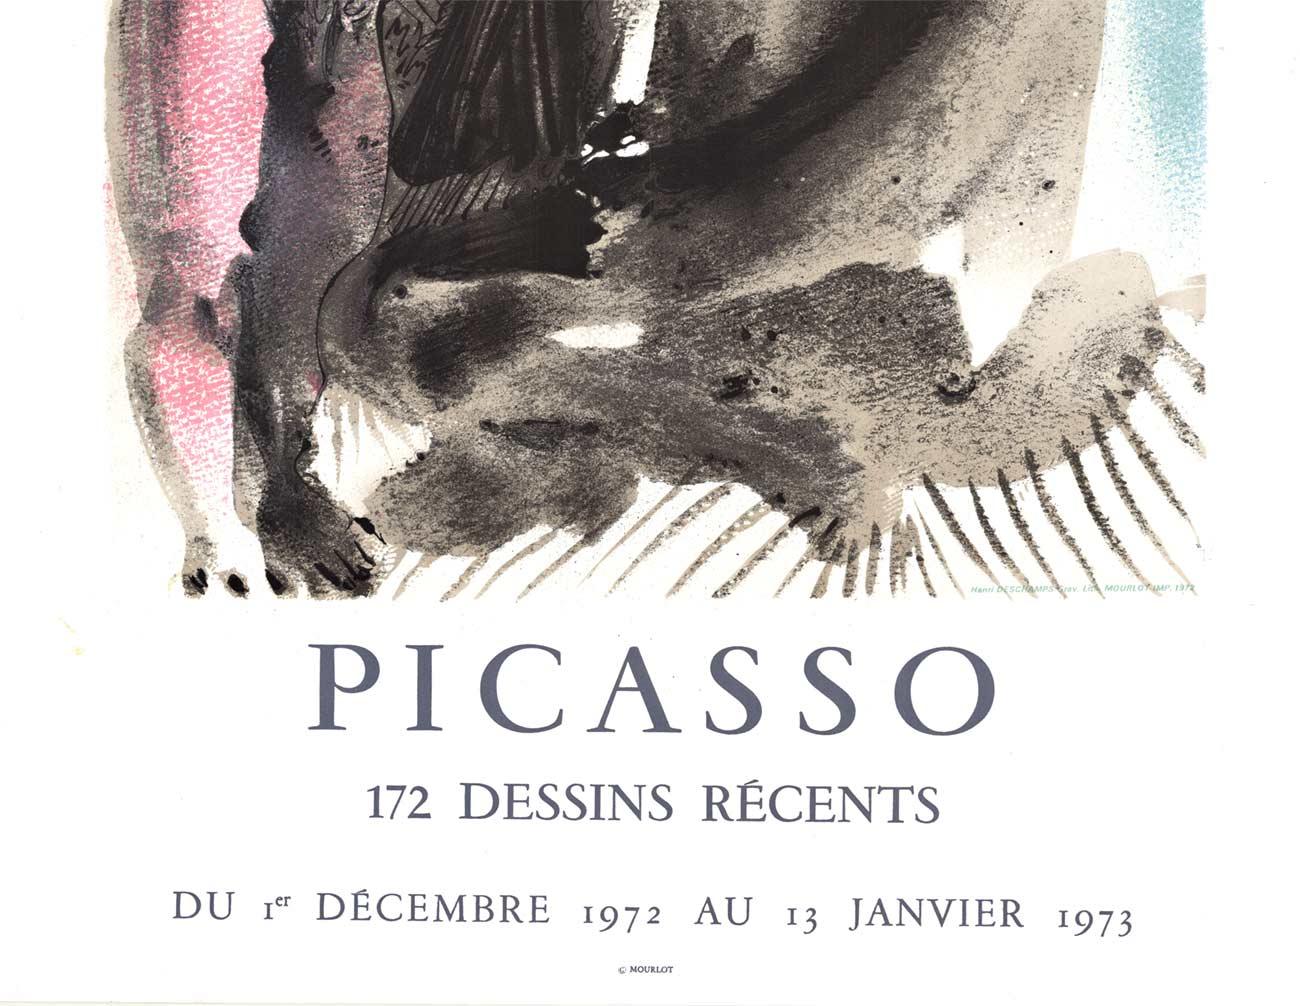 PICASSO, Galerie Louise Leiris Exhibition vintage poster - Abstract Print by Pablo Picasso